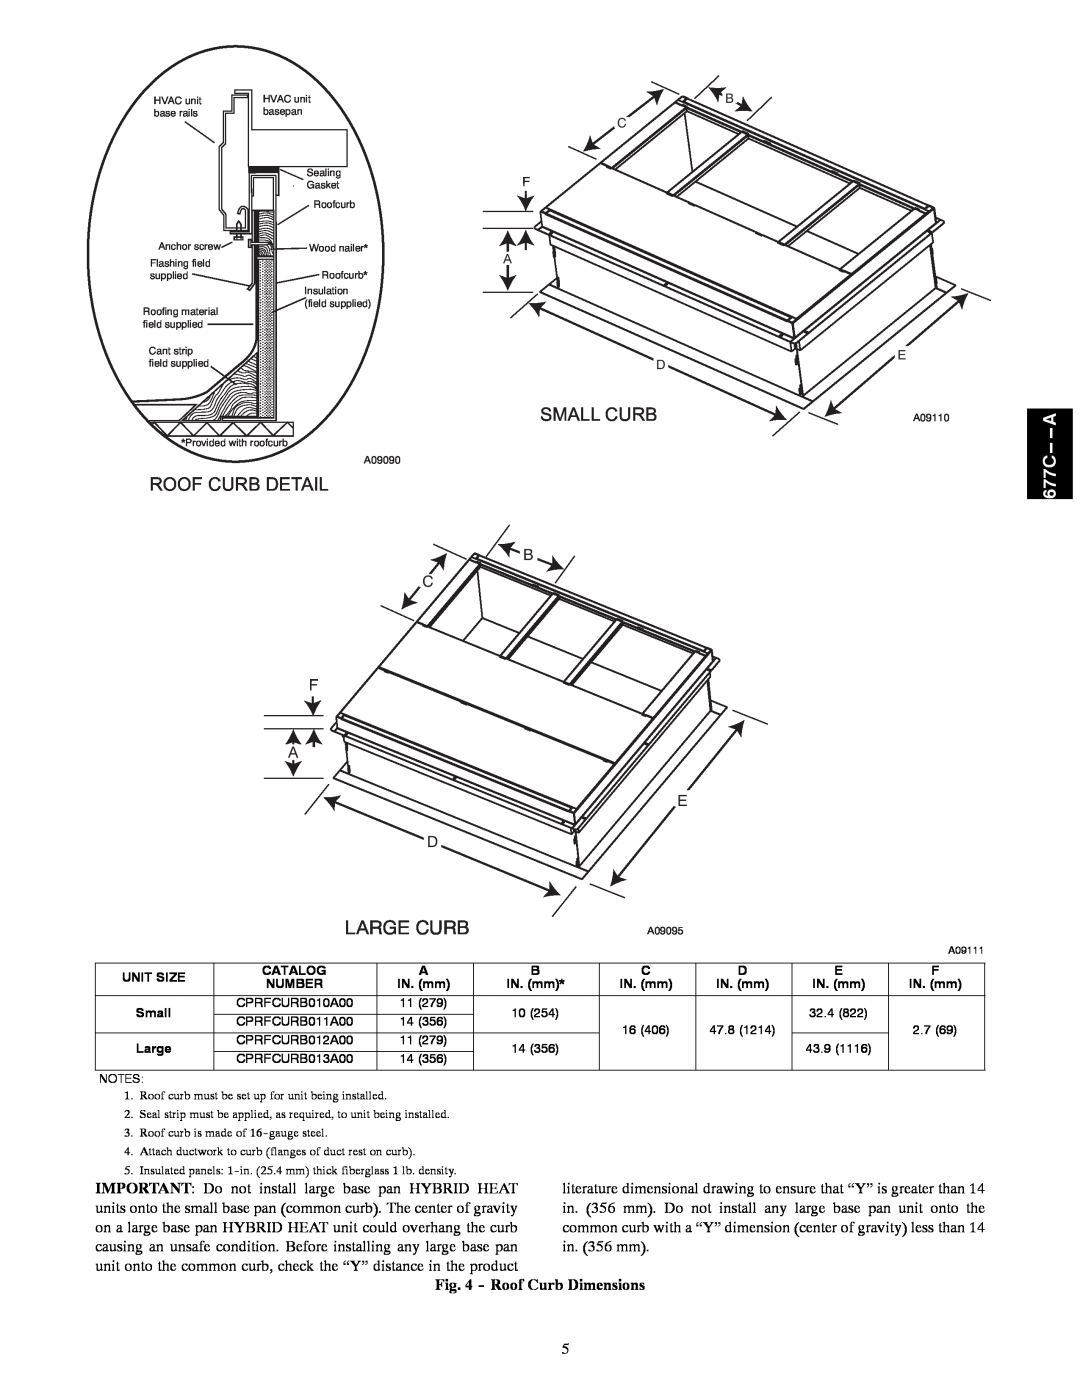 Bryant 677C--A installation instructions Roof Curb Dimensions, Small Curb, Roof Curb Detail, Large Curb 